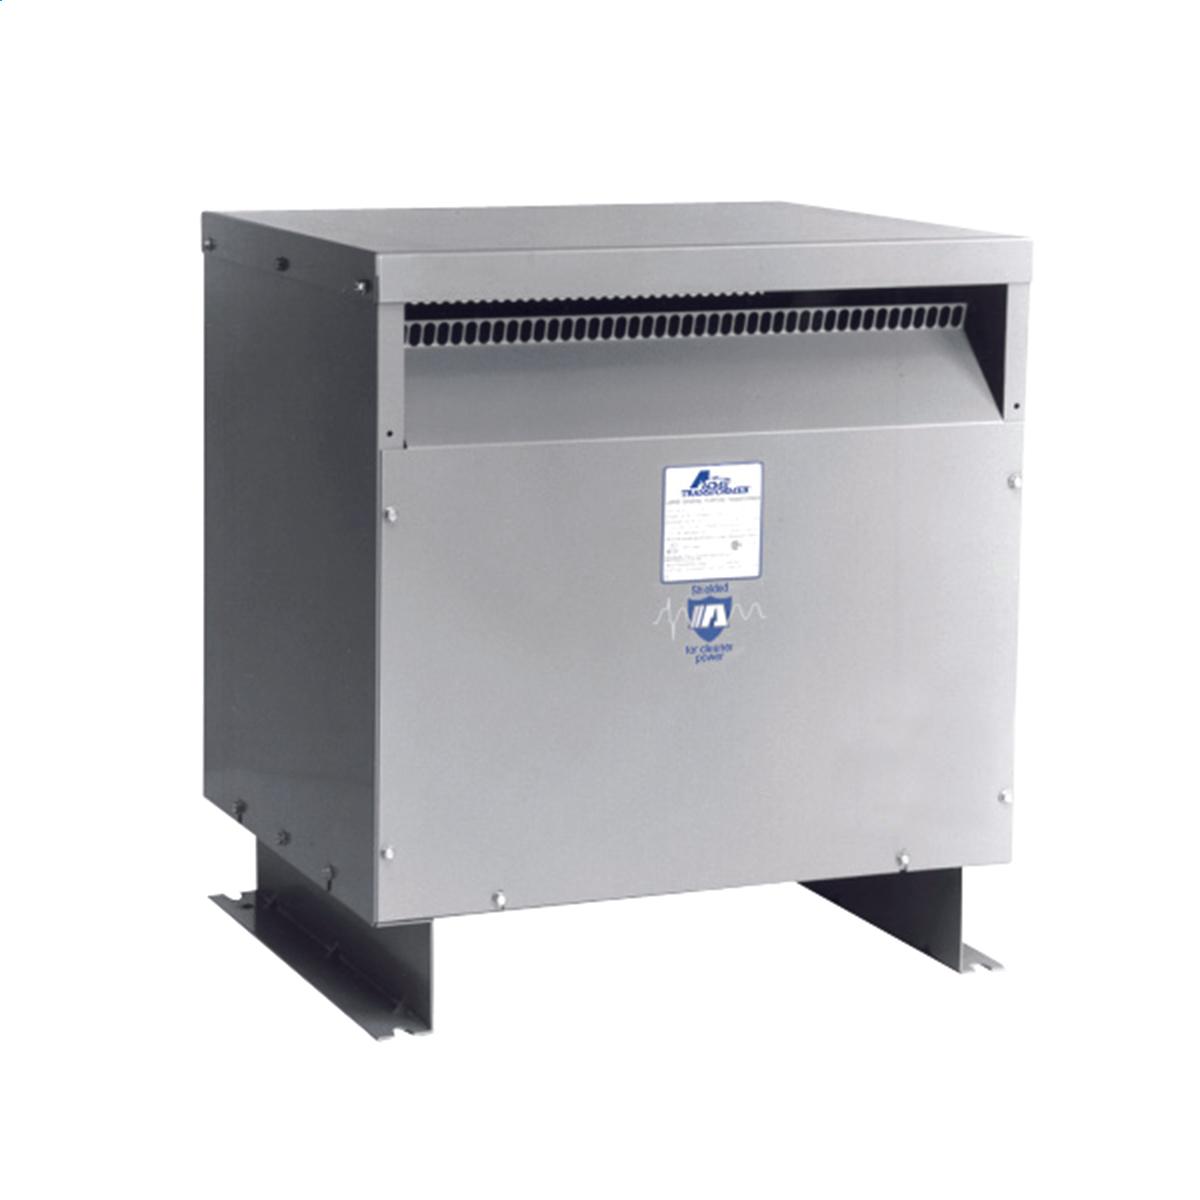 Hubbell WB015K08 Medium Voltage Transformer - Single Phase, 4800 - 240/480V, 15kVA  ; Lower operating cost over Liquid-filled ; No additional fireproofing or venting ; Long life expectancy ; Smaller, lighter easy to maintain